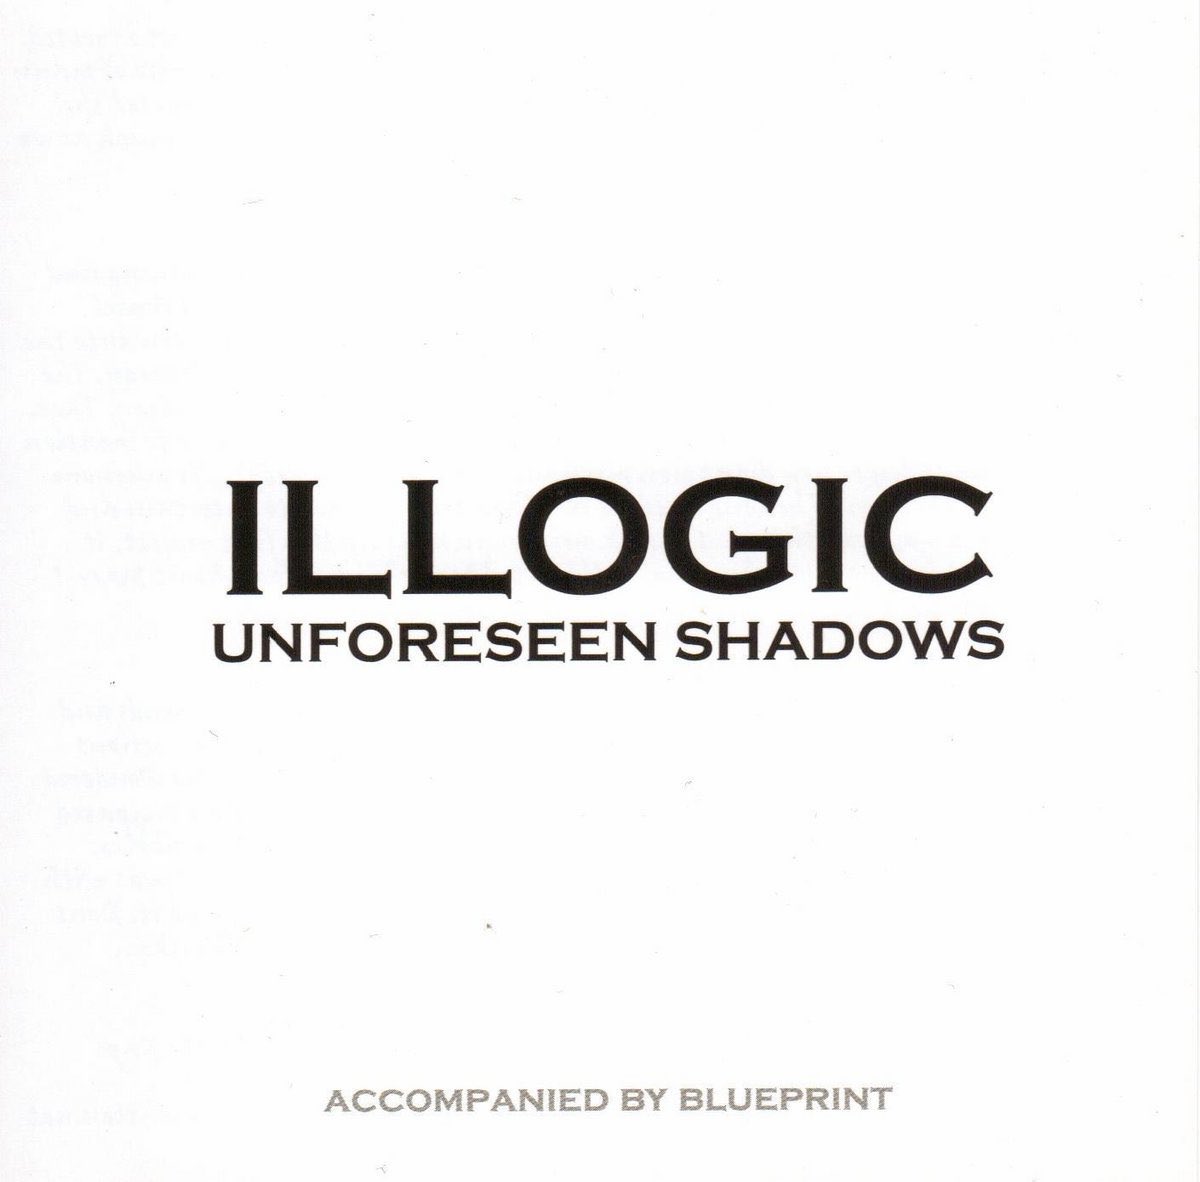 May 9, 2000 @Illogic614 released Unforeseen Shadows Produced by @printmatic Some Features Include @doseone @printmatic Lioness and more